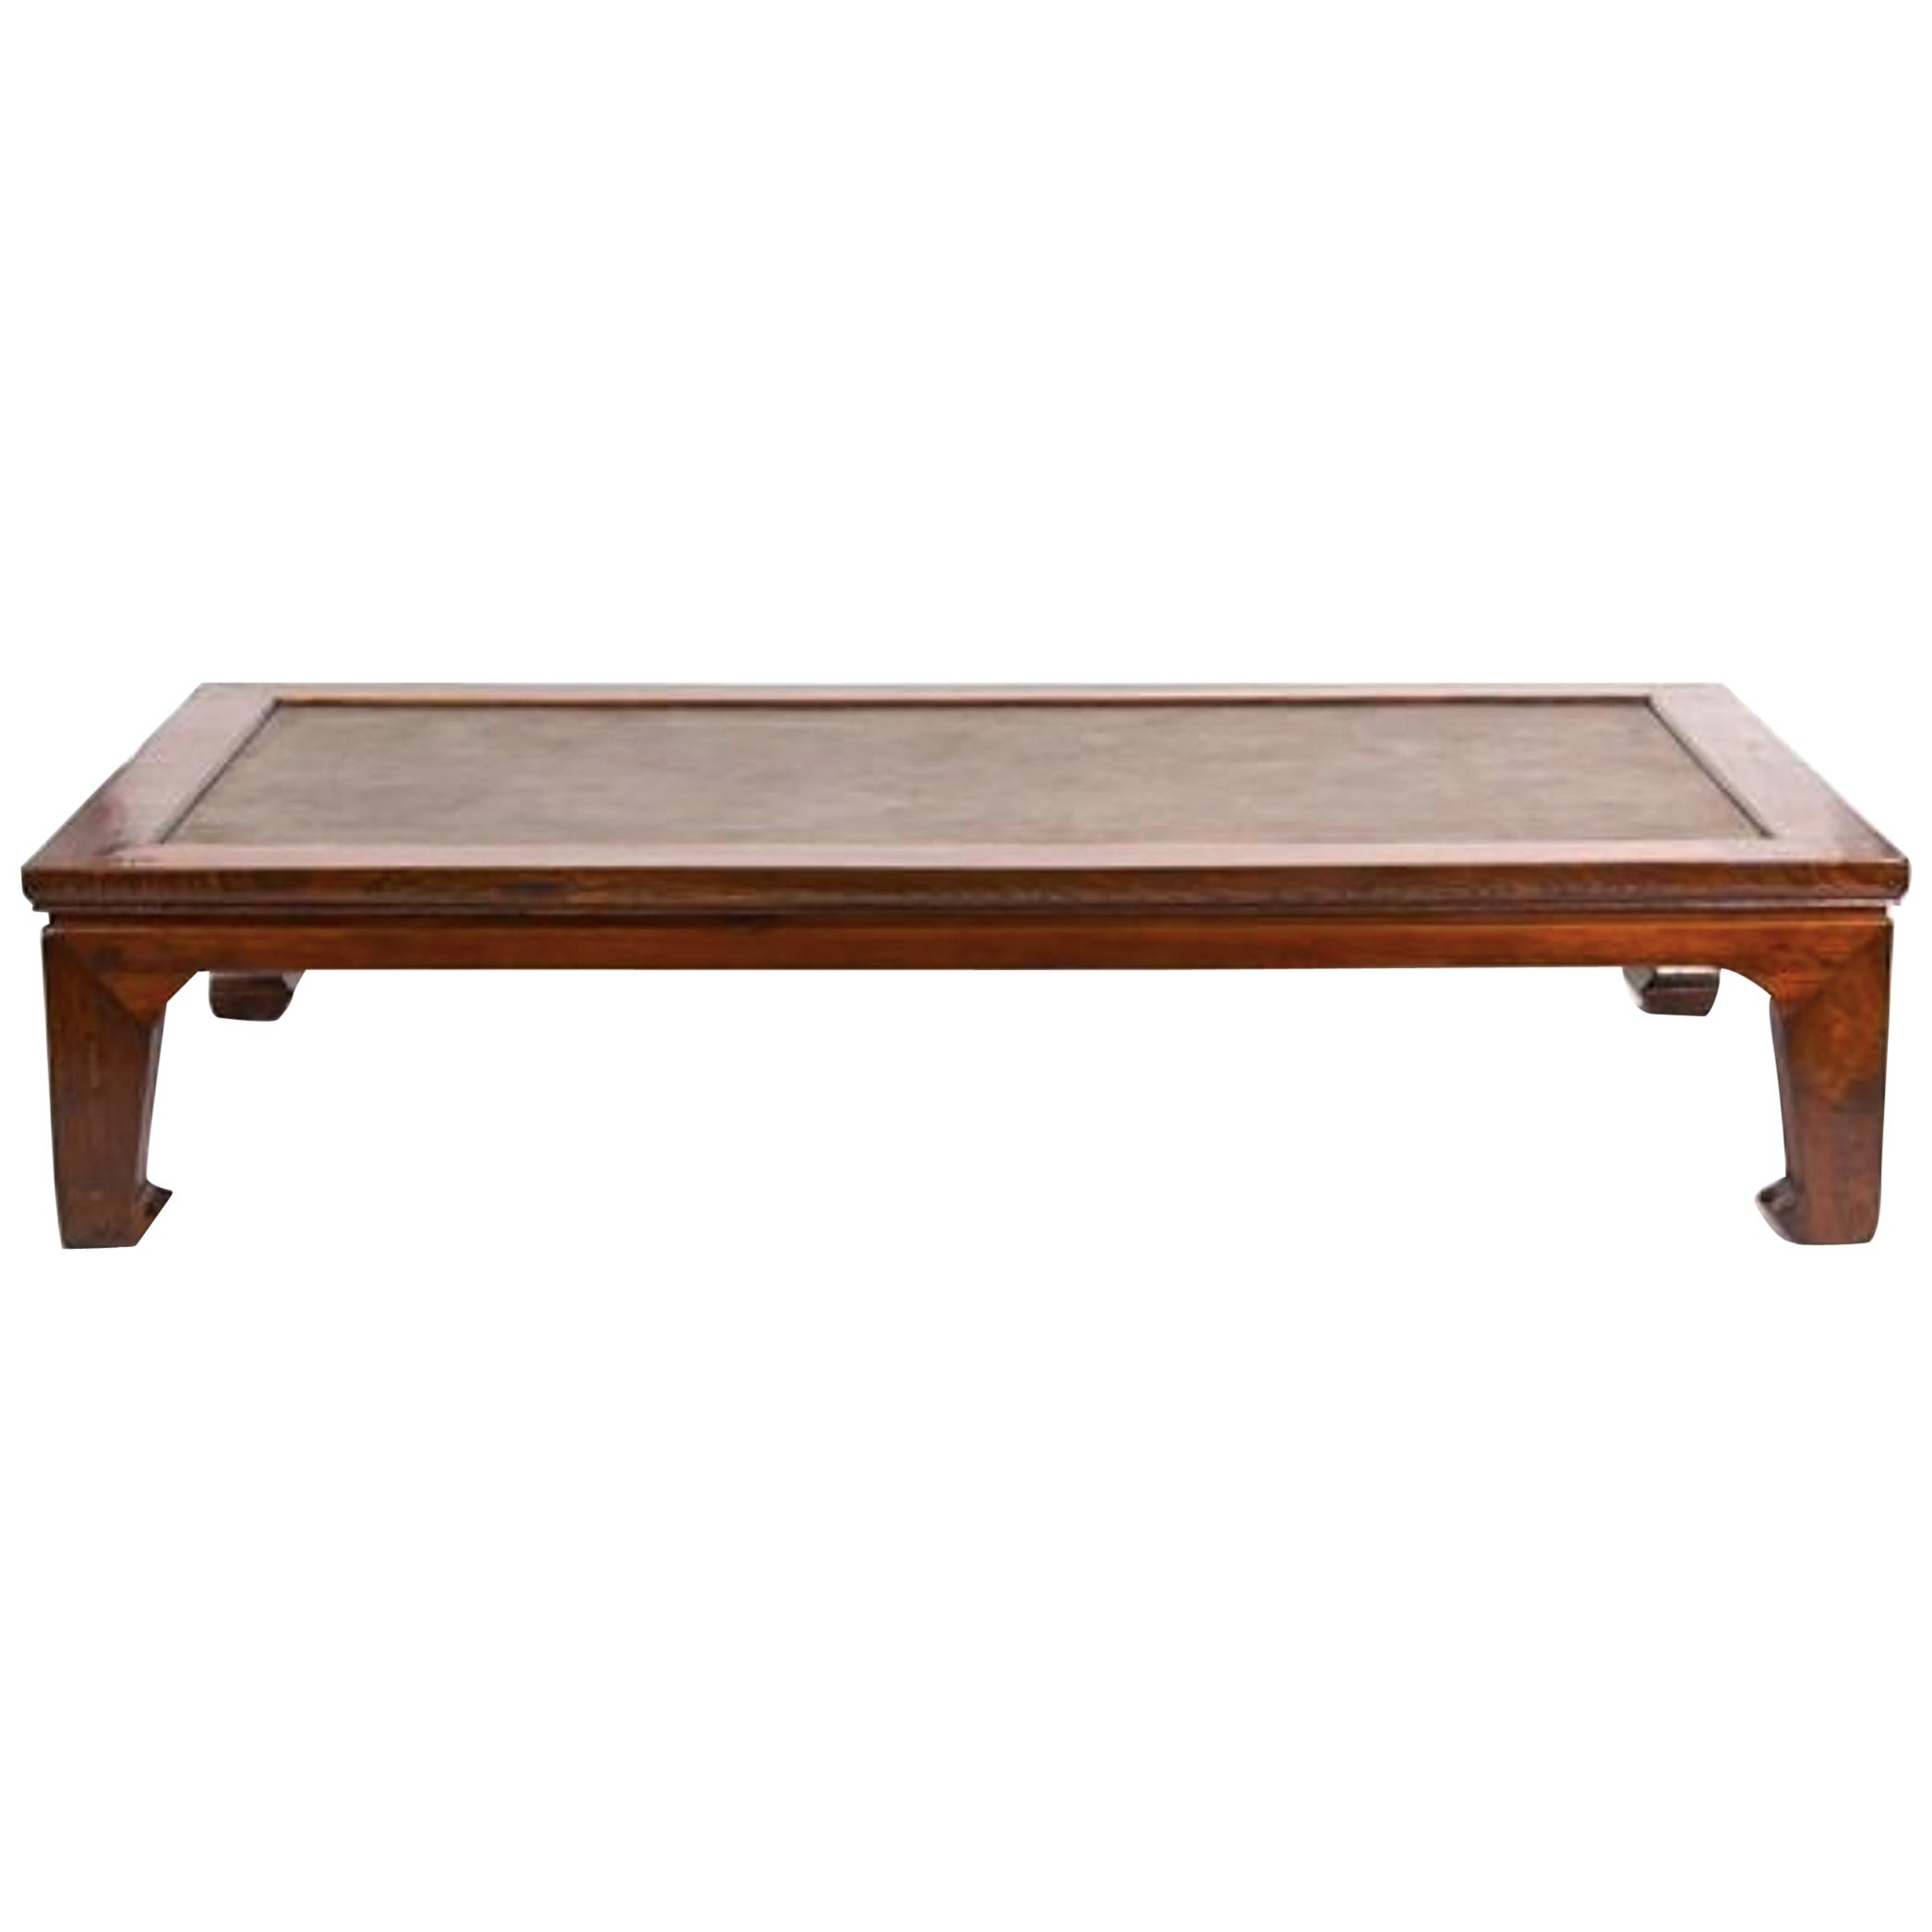 Asian Style Coffee Table With Inset Woven Cane Top At 1stdibs throughout measurements 2093 X 2093